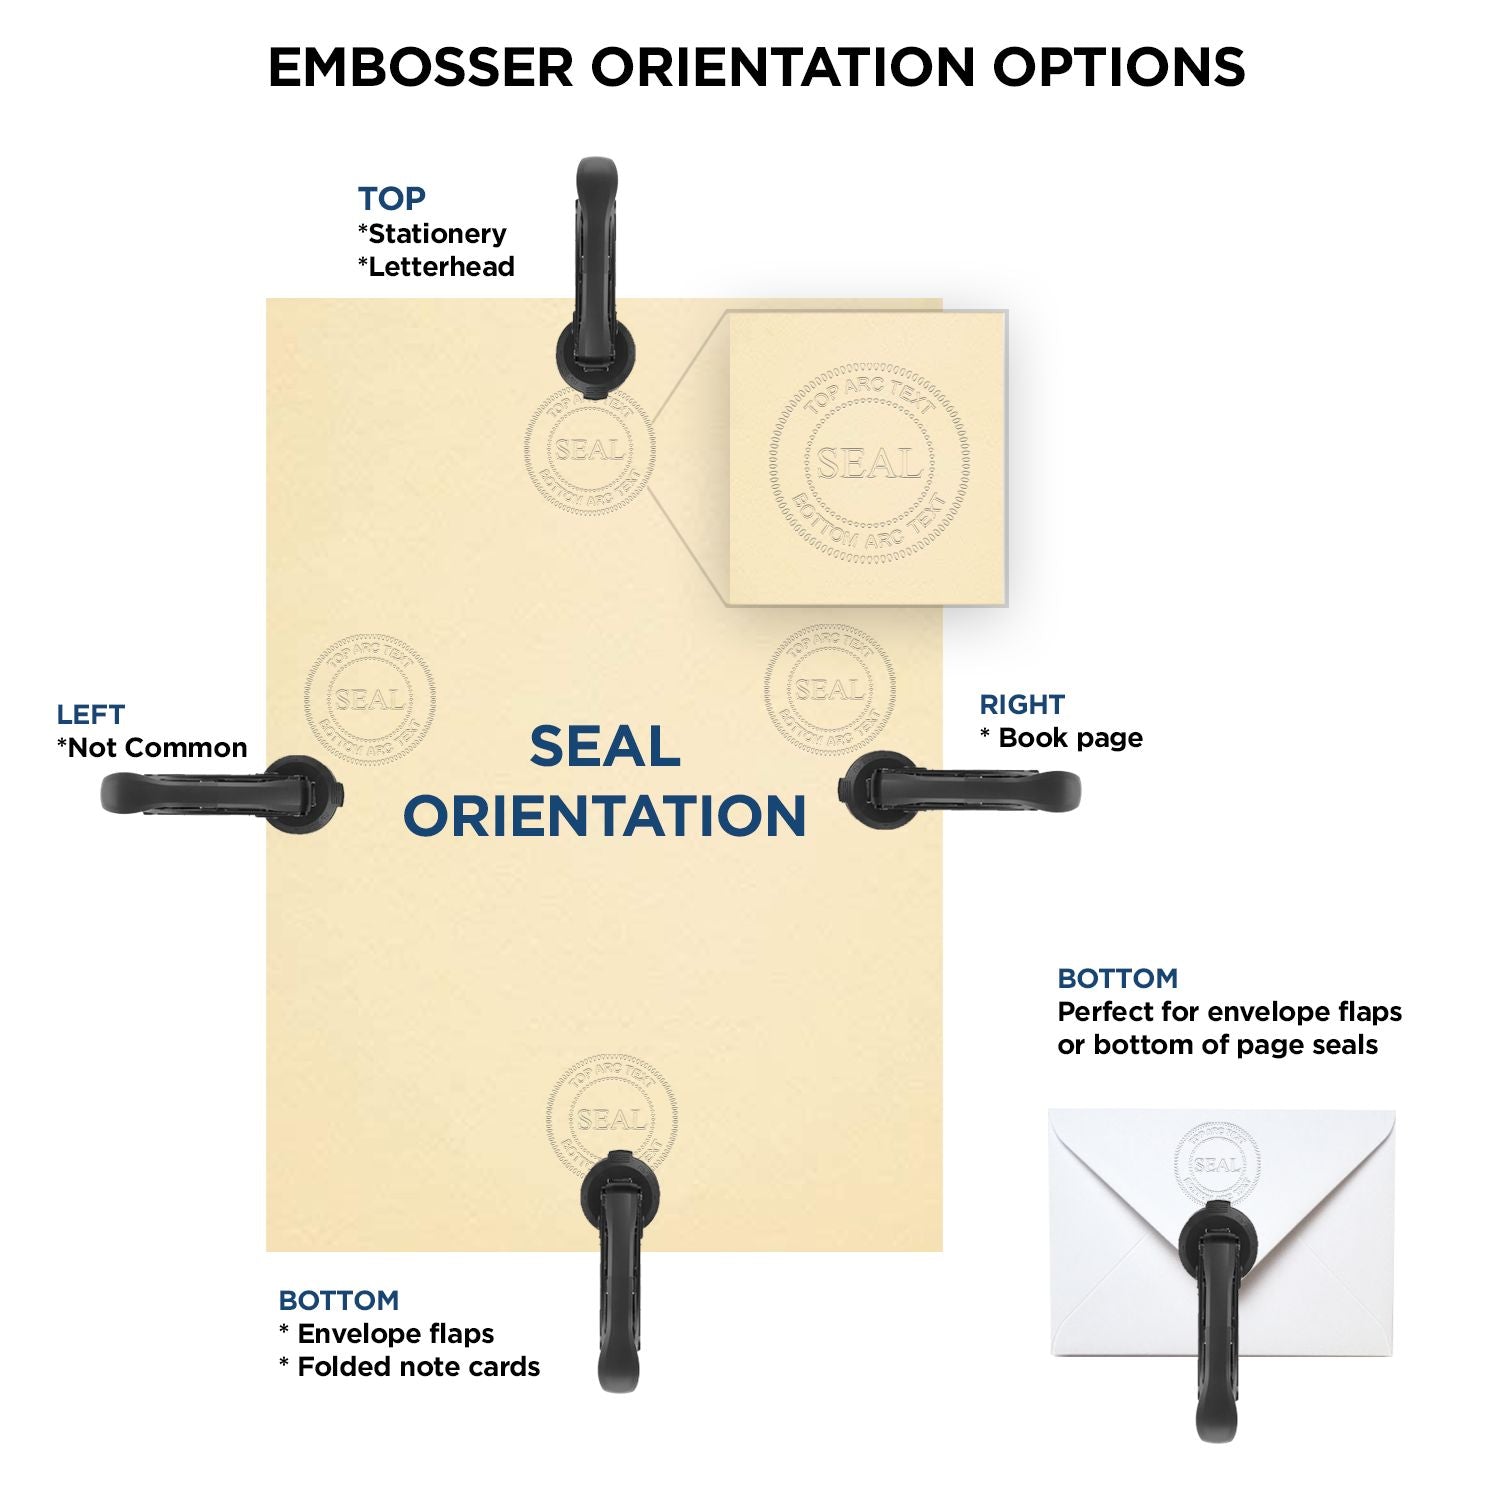 An infographic for the Oregon Engineer Desk Seal showing embosser orientation, this is showing examples of a top, bottom, right and left insert.